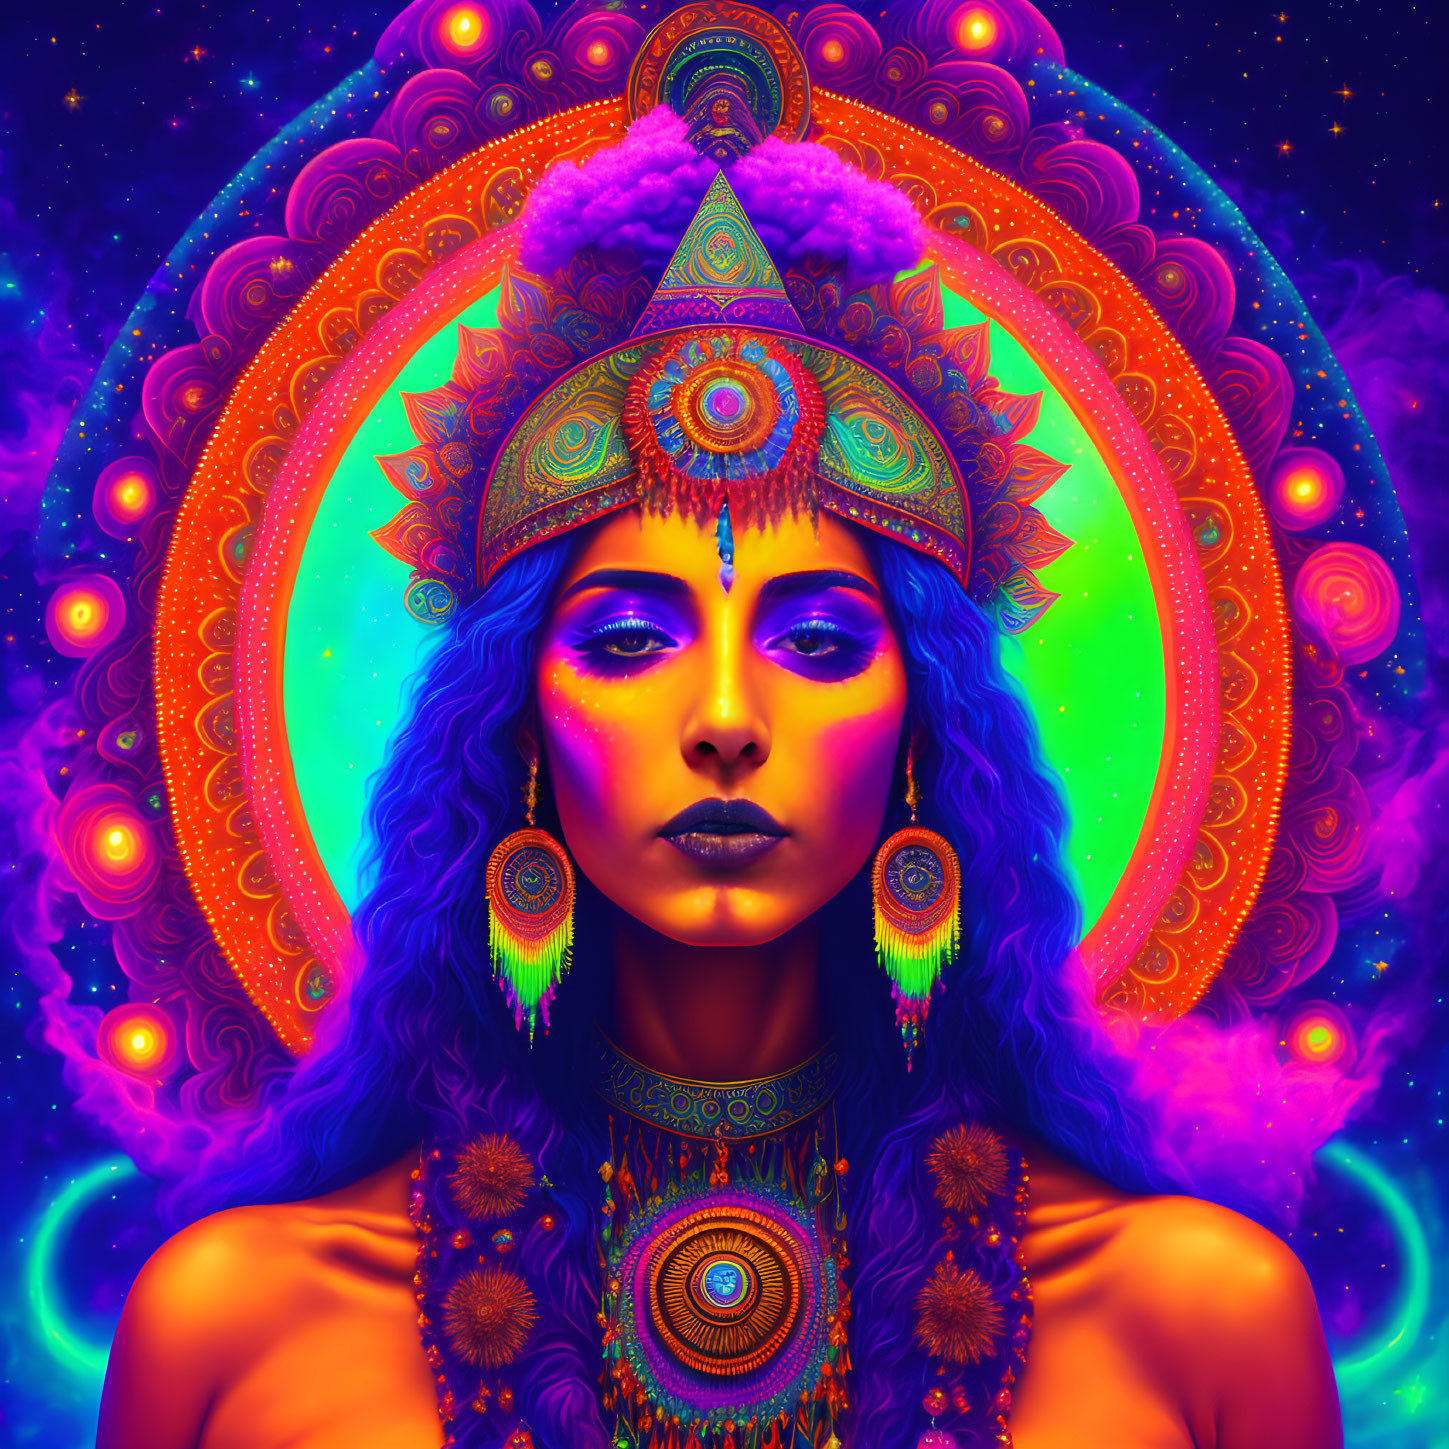 Colorful digital art: woman with ornate headdress in cosmic setting